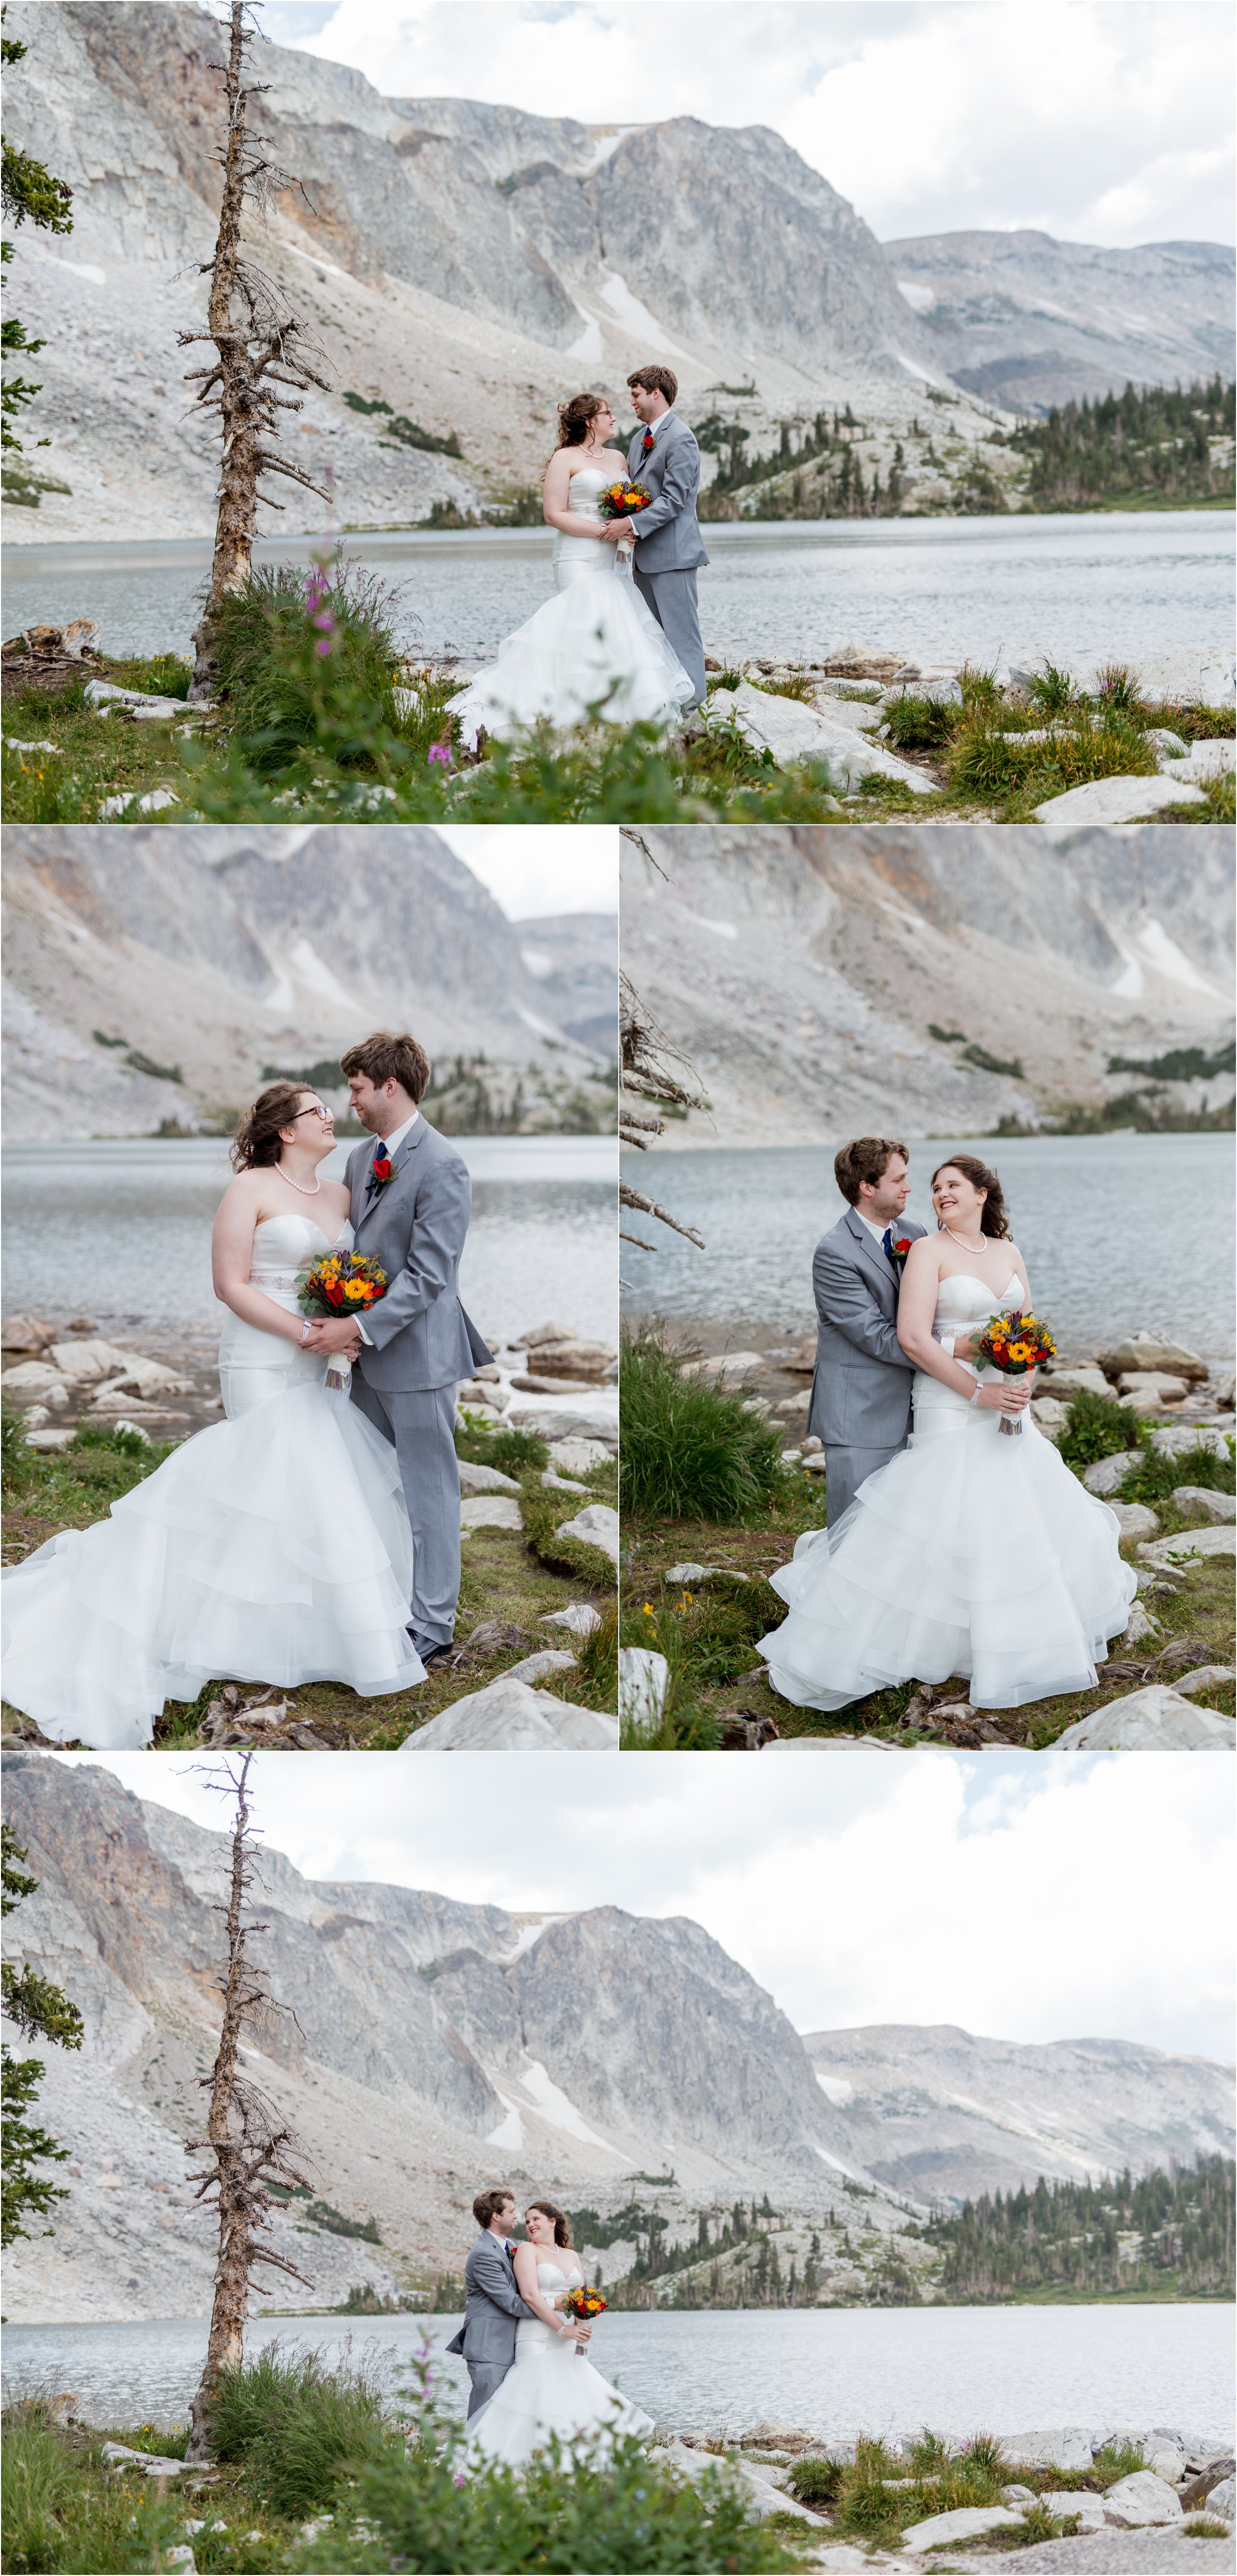 bride and groom pose for photos in front of lake marie in snowy range before their st. alban's chapel wedding